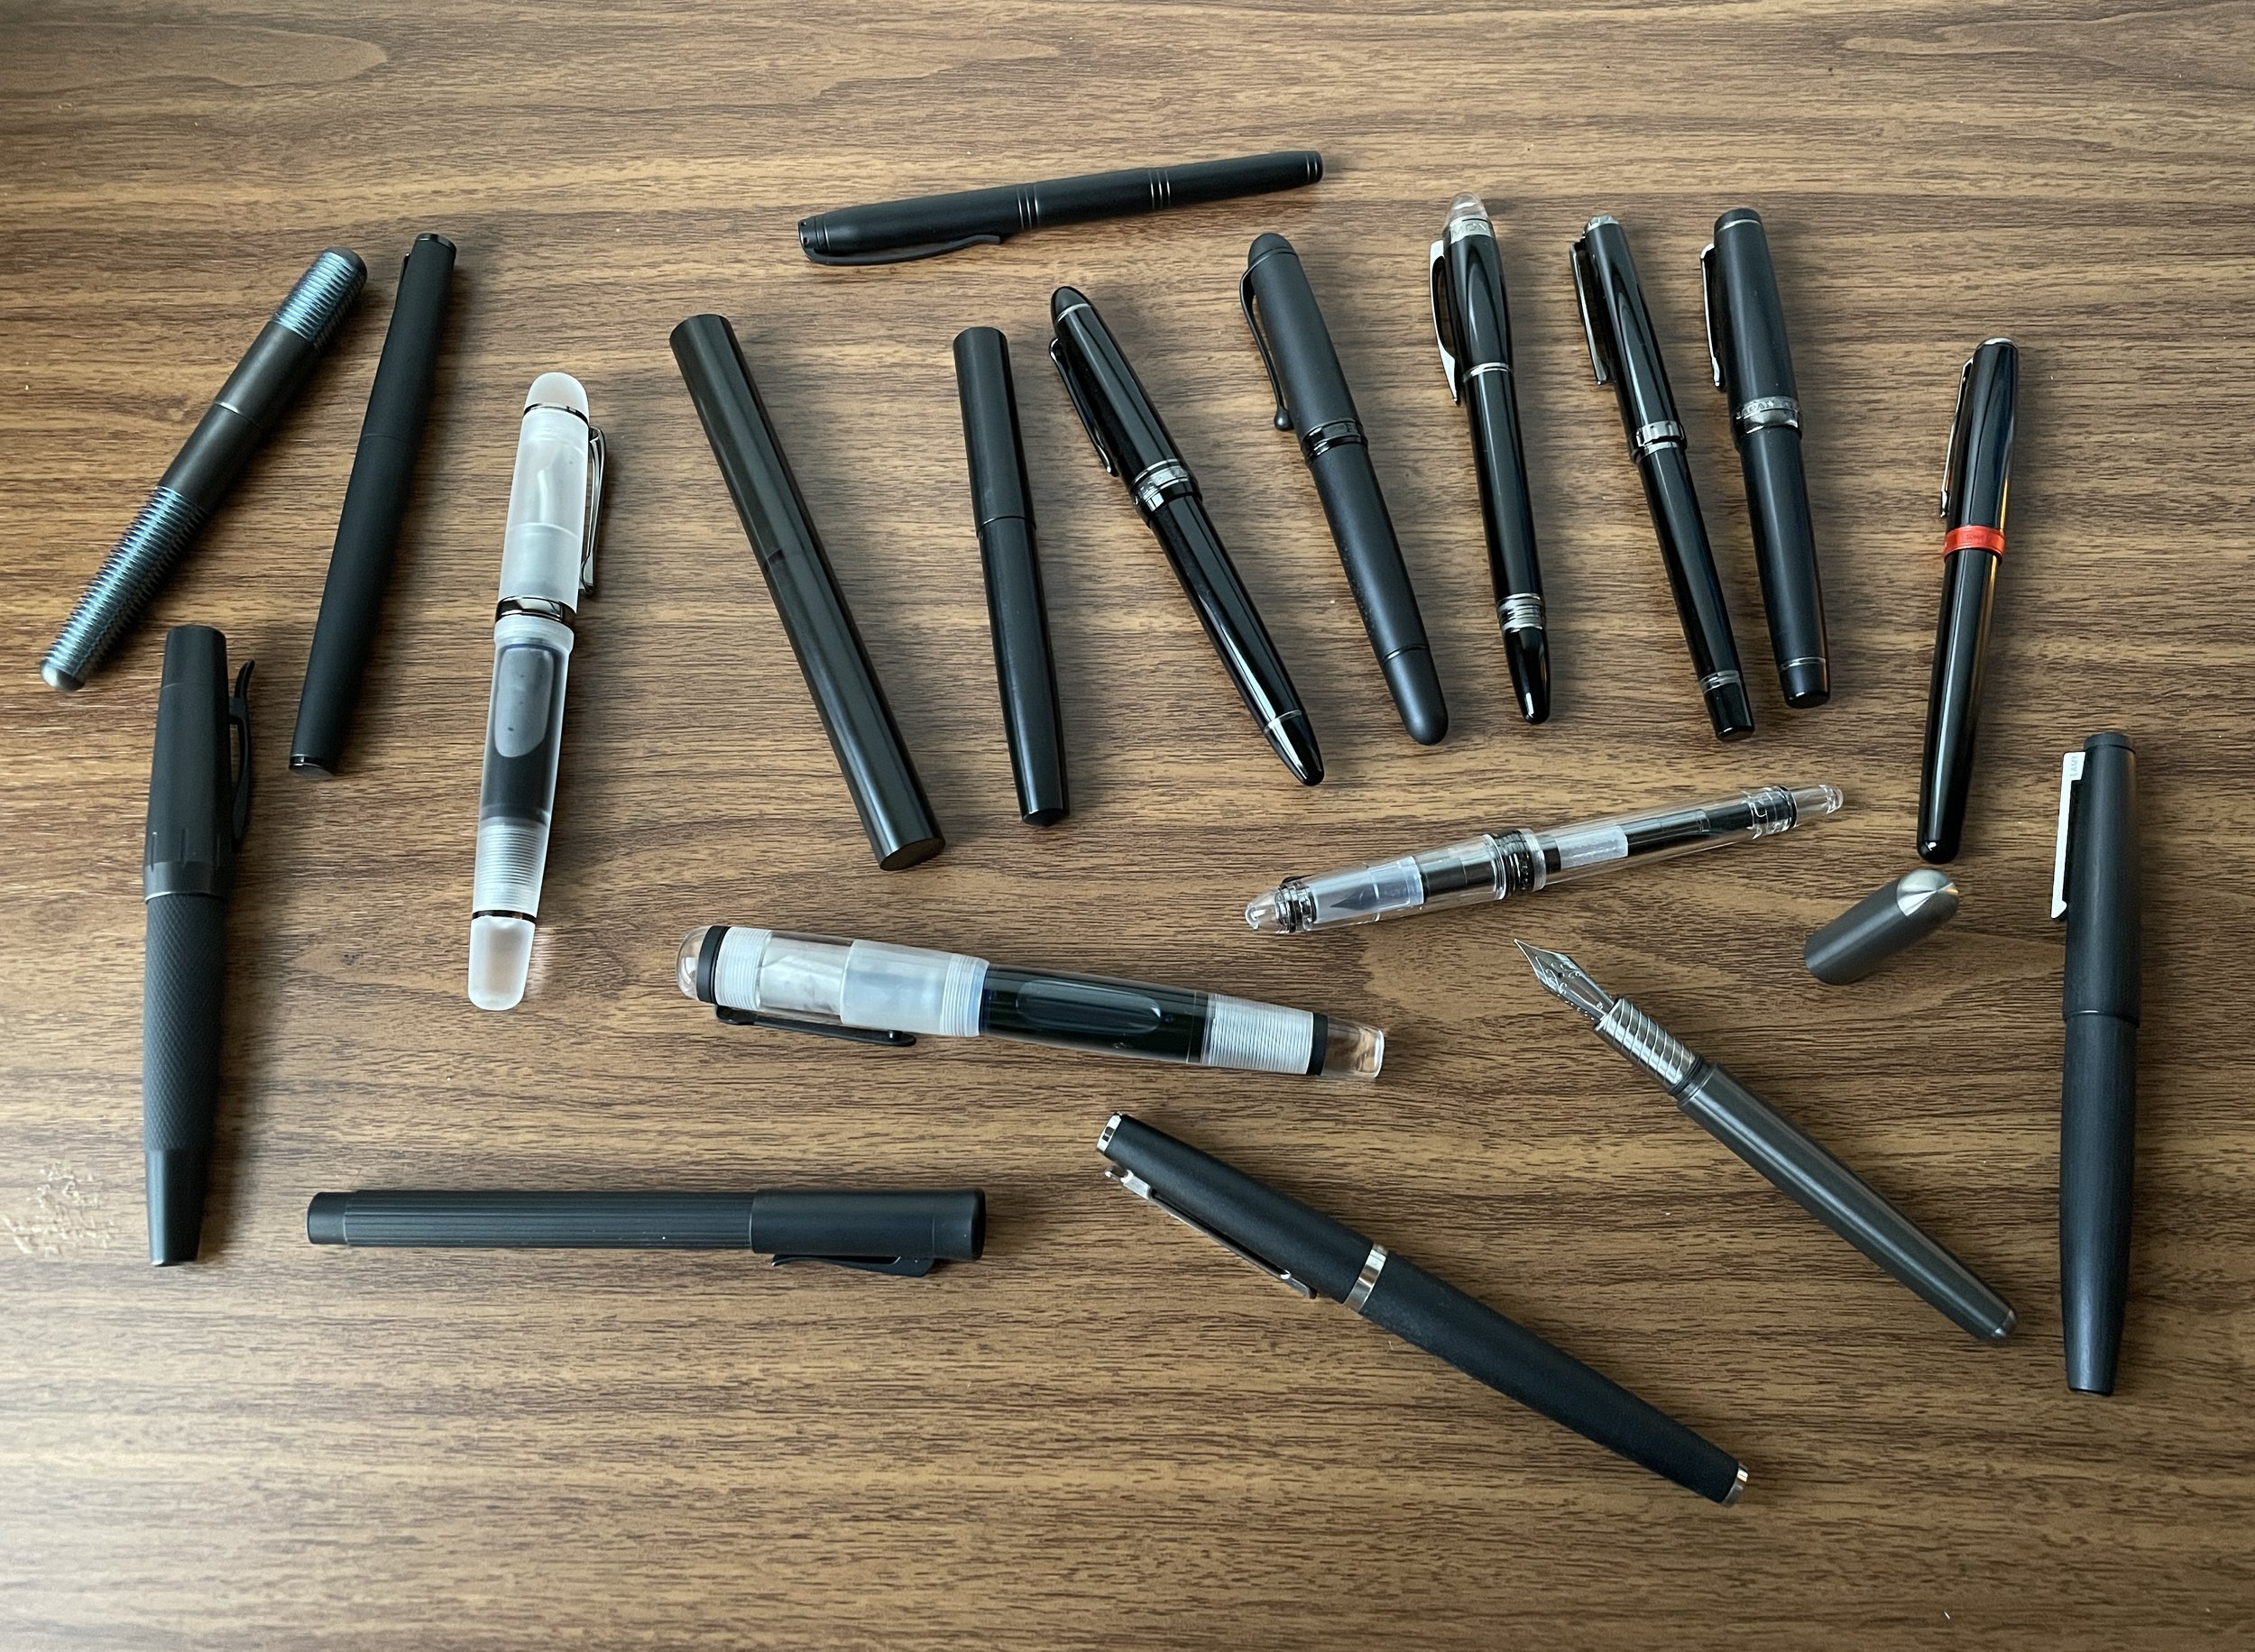 The Allure of the Stealth Pen: What Makes the All-Black Pen So